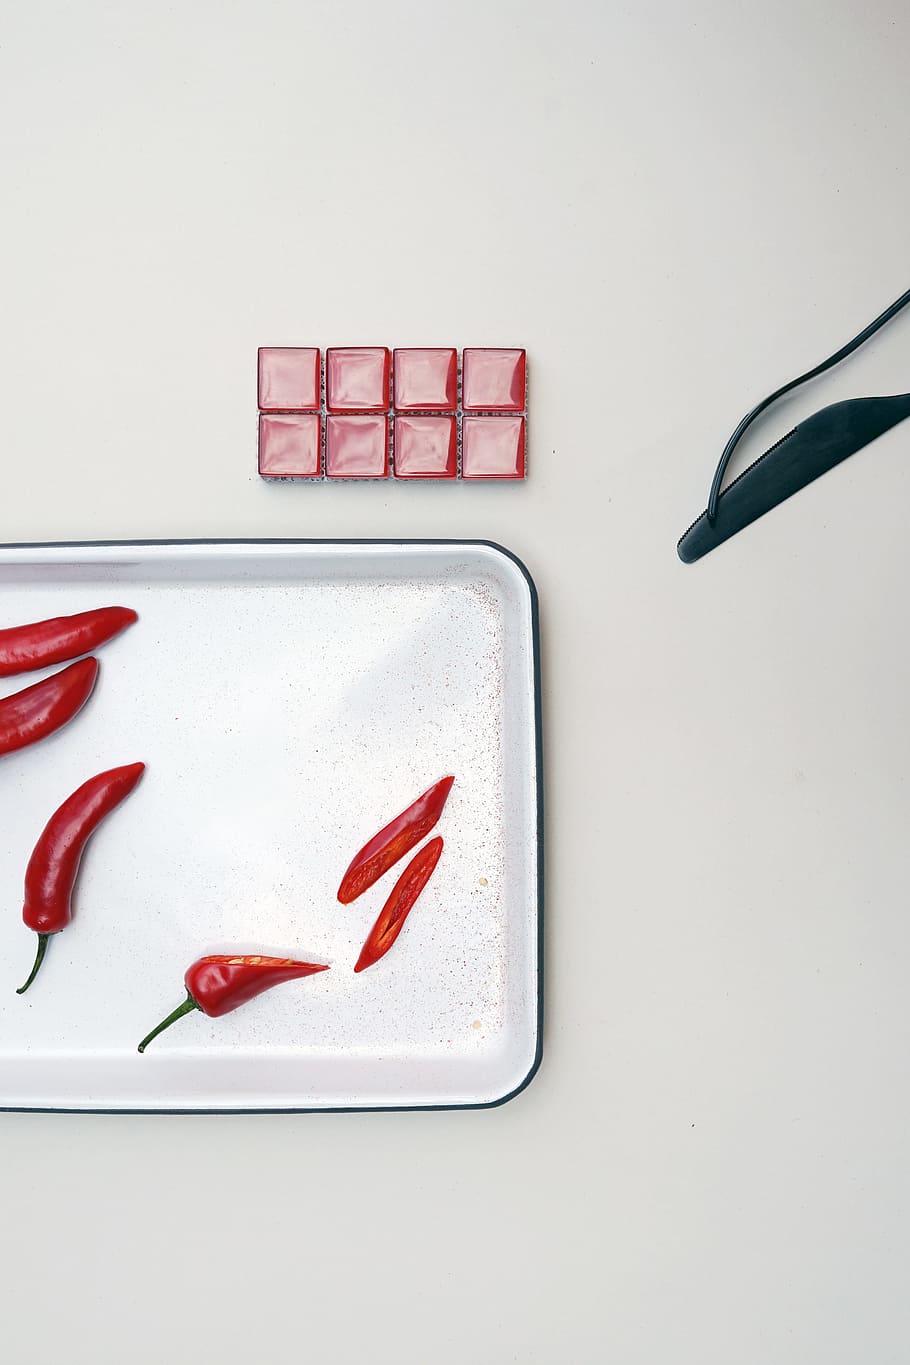 Sliced Chili On Plate, Food, Pepper, Tile, Texture, - Spice - HD Wallpaper 